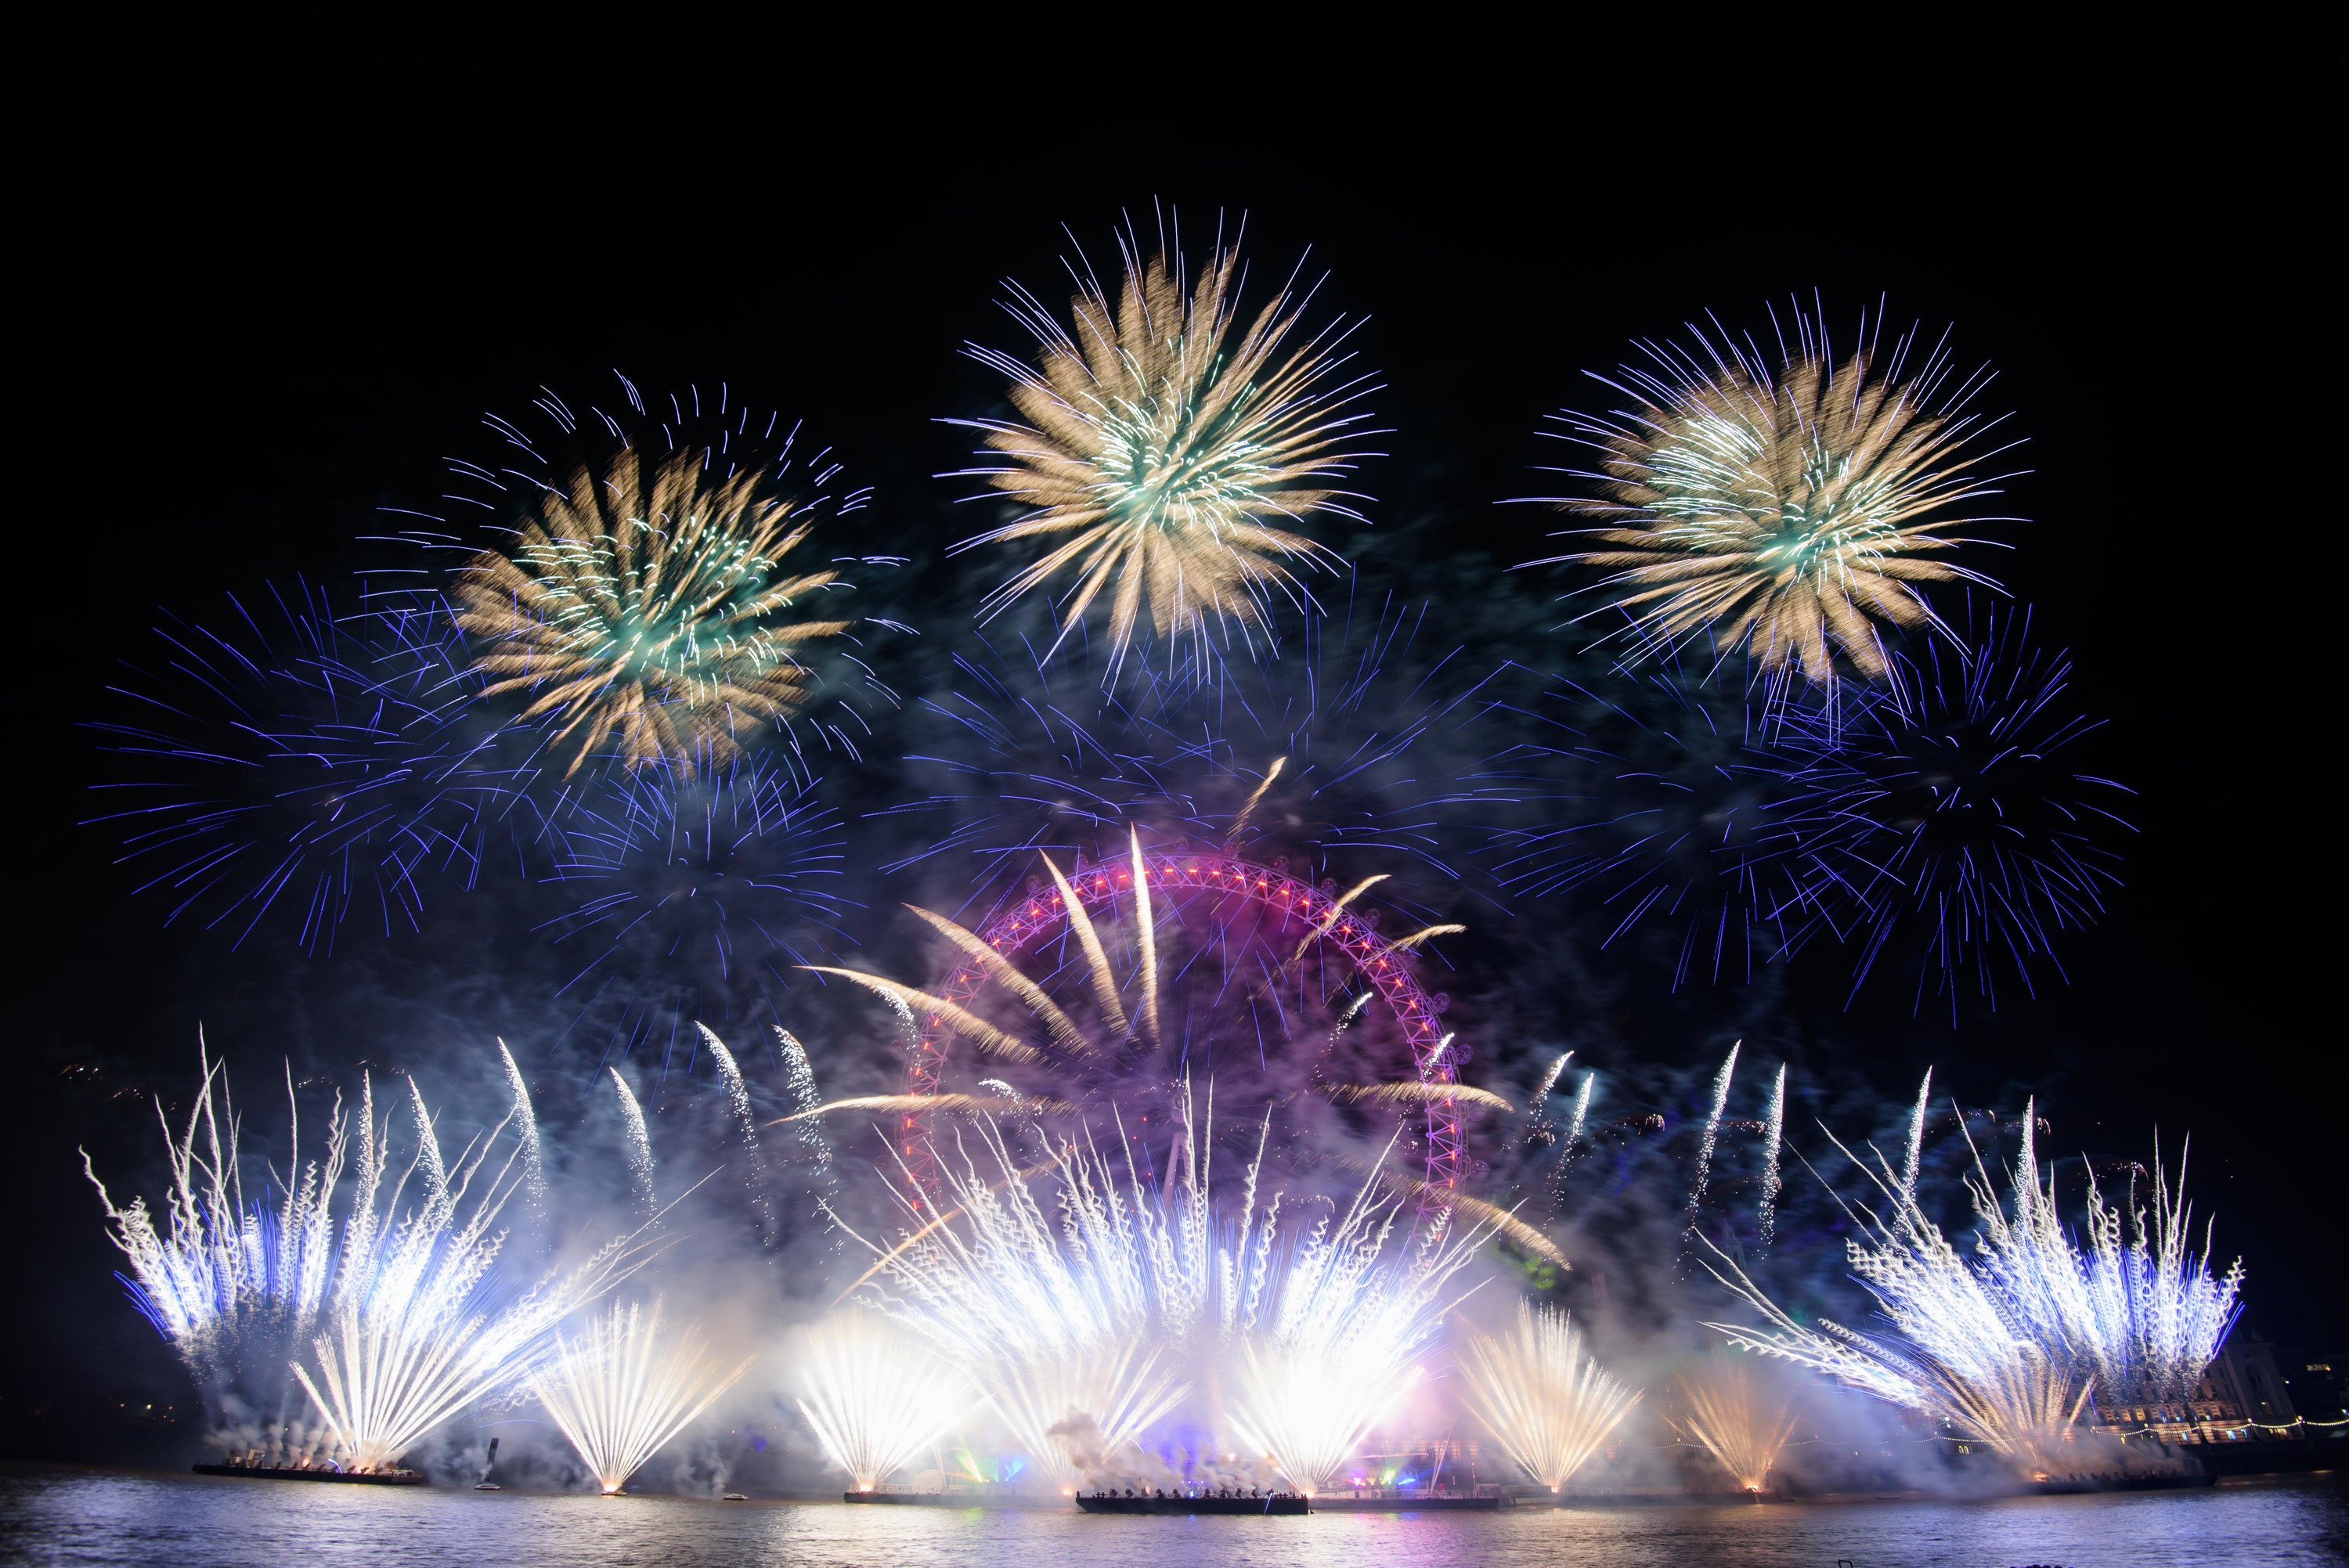 How to score tickets to New Year Eve fireworks 2018 in London